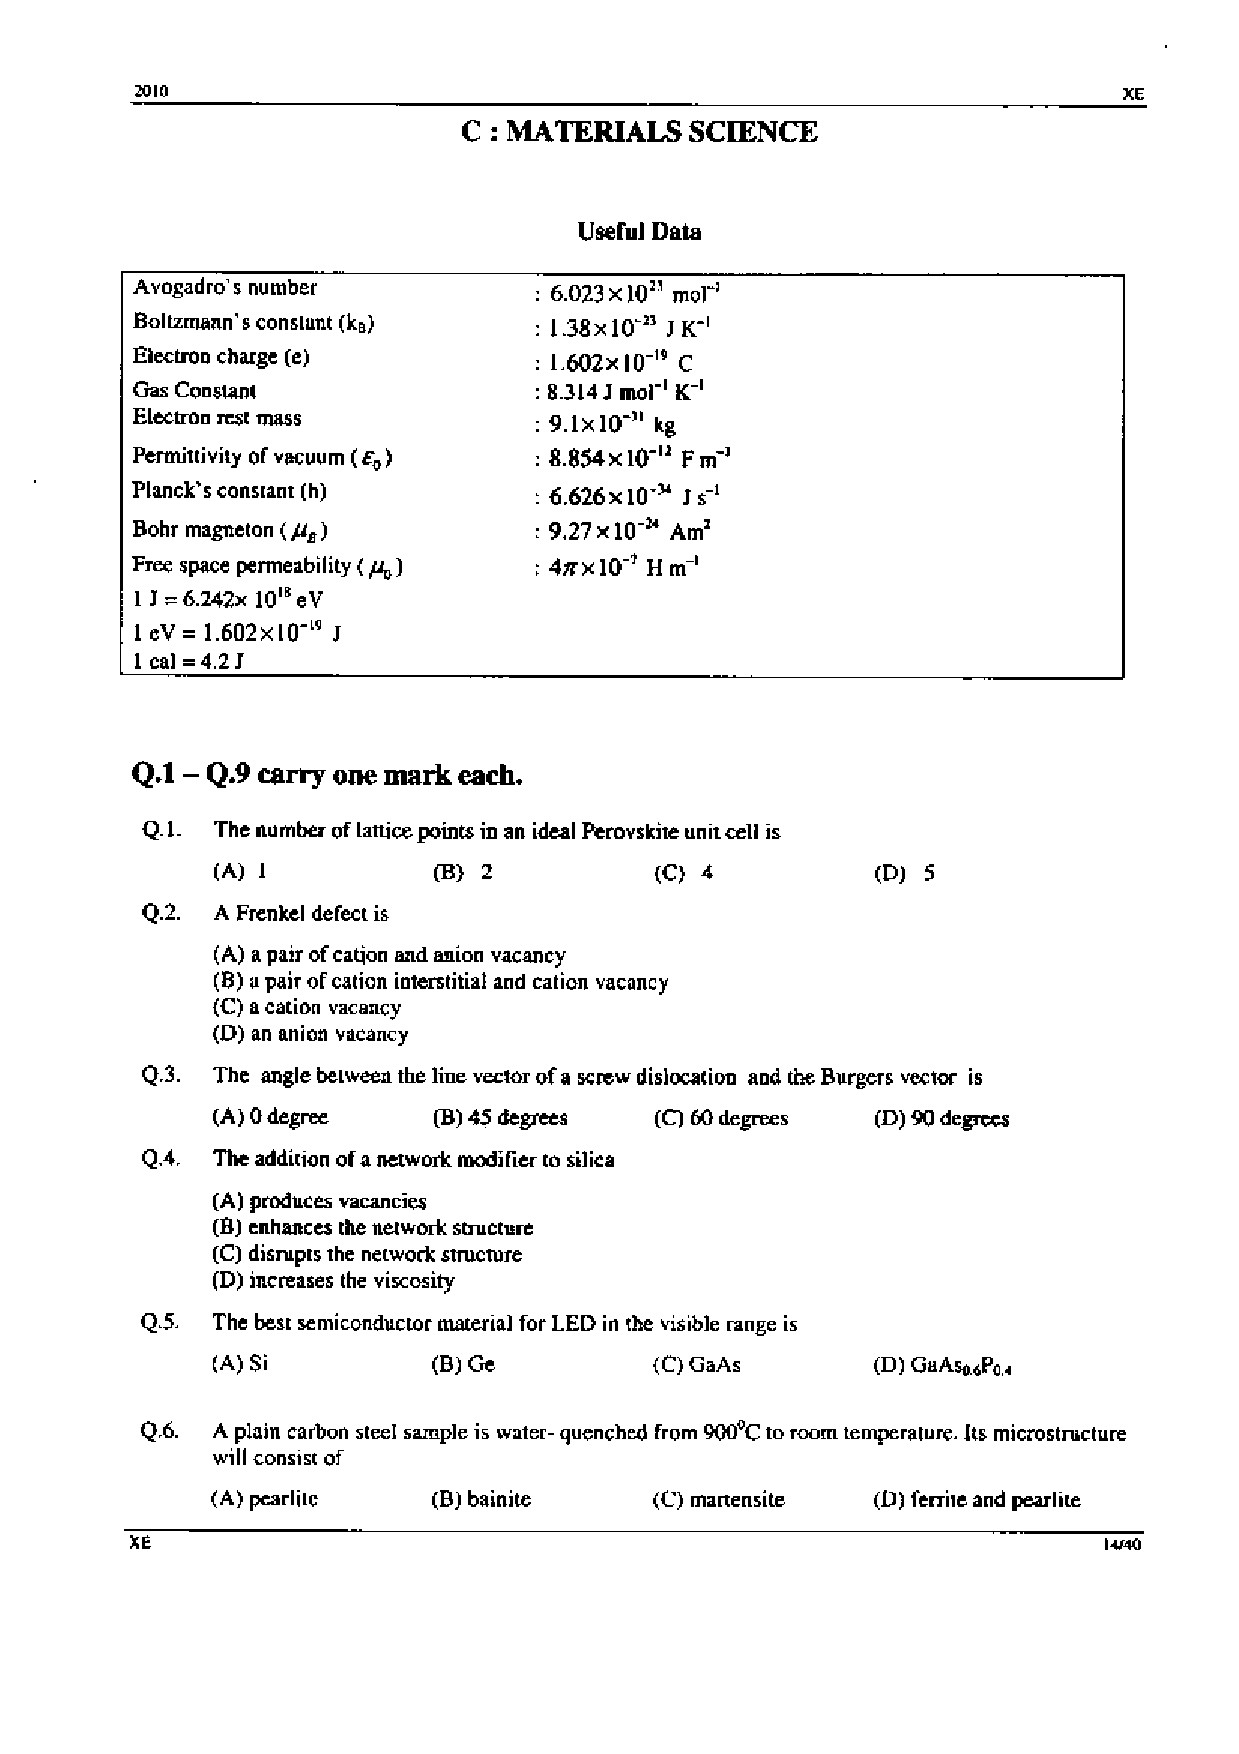 GATE Exam Question Paper 2010 Engineering Sciences 14